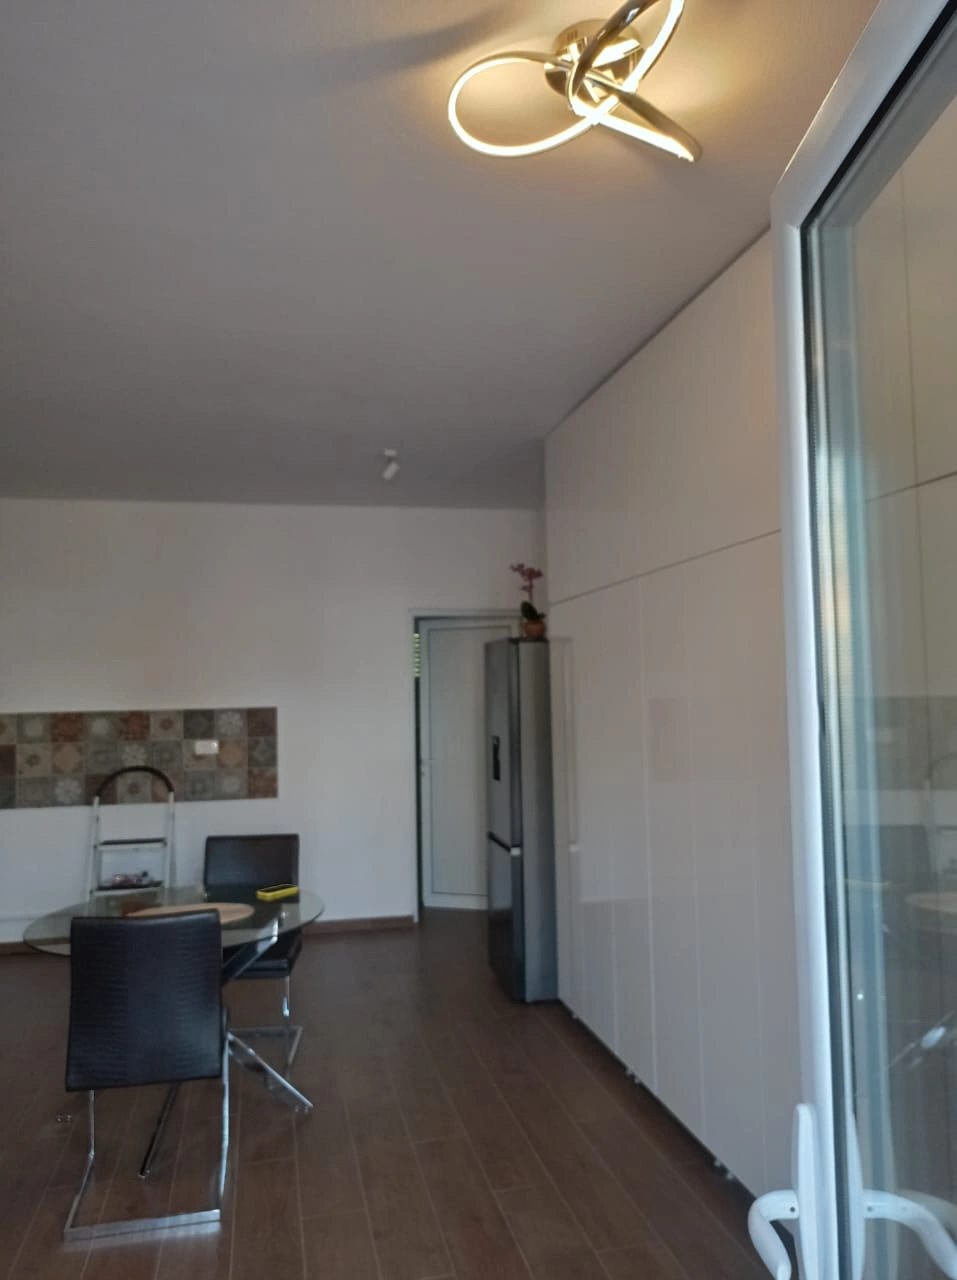 New 1 bedroom apartment 47m2 on the ground floor with own parking plac